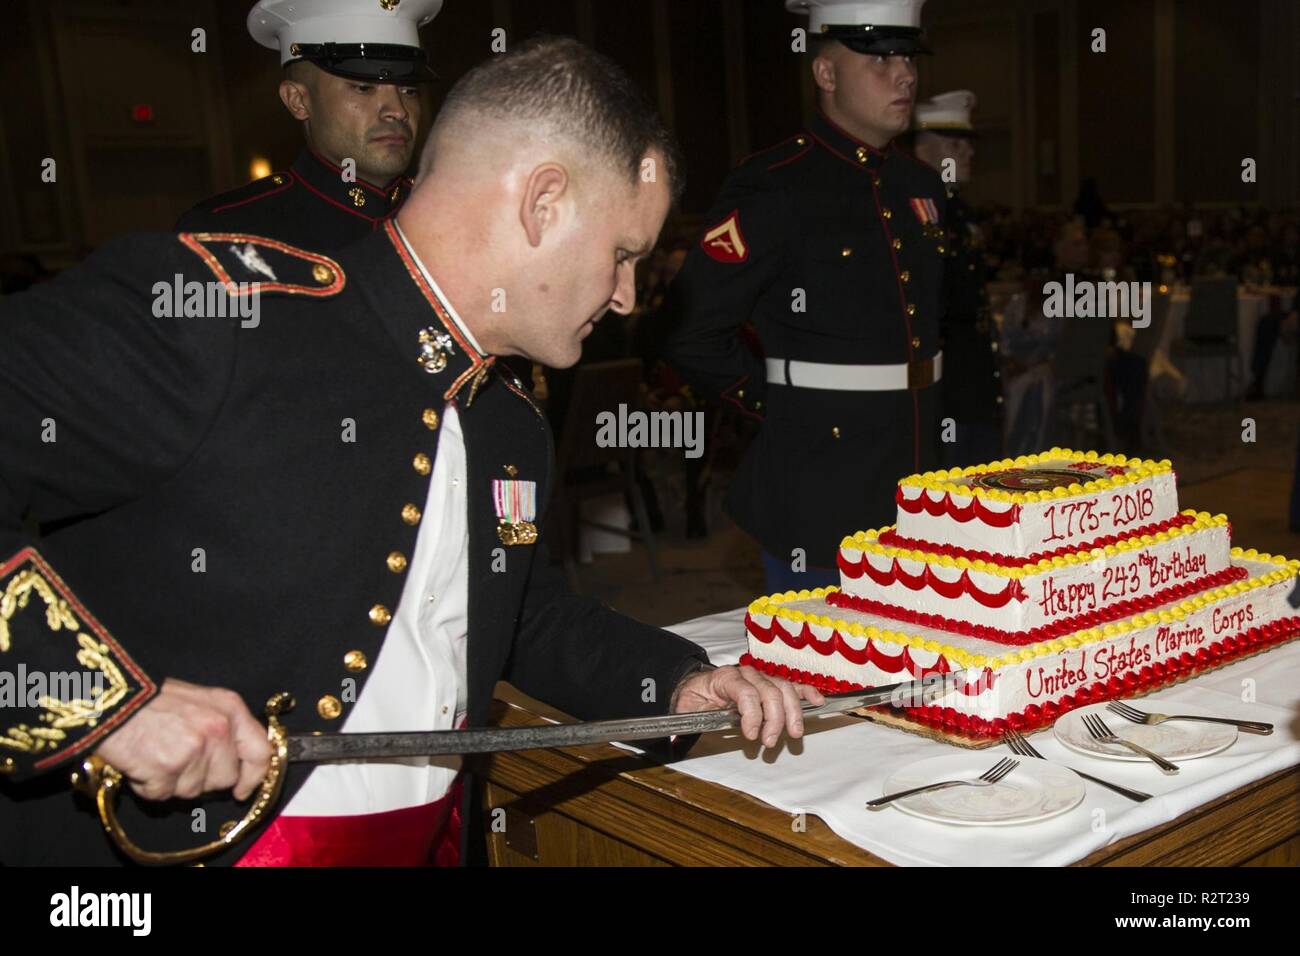 Col. Sean C. Killeen, commanding officer of Headquarters Service Battalion slices first piece of the birthday cake in the cake cutting ceremony during the units Marine Cops Birthday Ball celebration on Hilton Head Island, Nov. 9. Headquarters and Service Battalion is the parent command for personnel who provide continuous support to the depot and its subordinate commands in order to accomplish the depot’s mission of “Making Marines.” Stock Photo